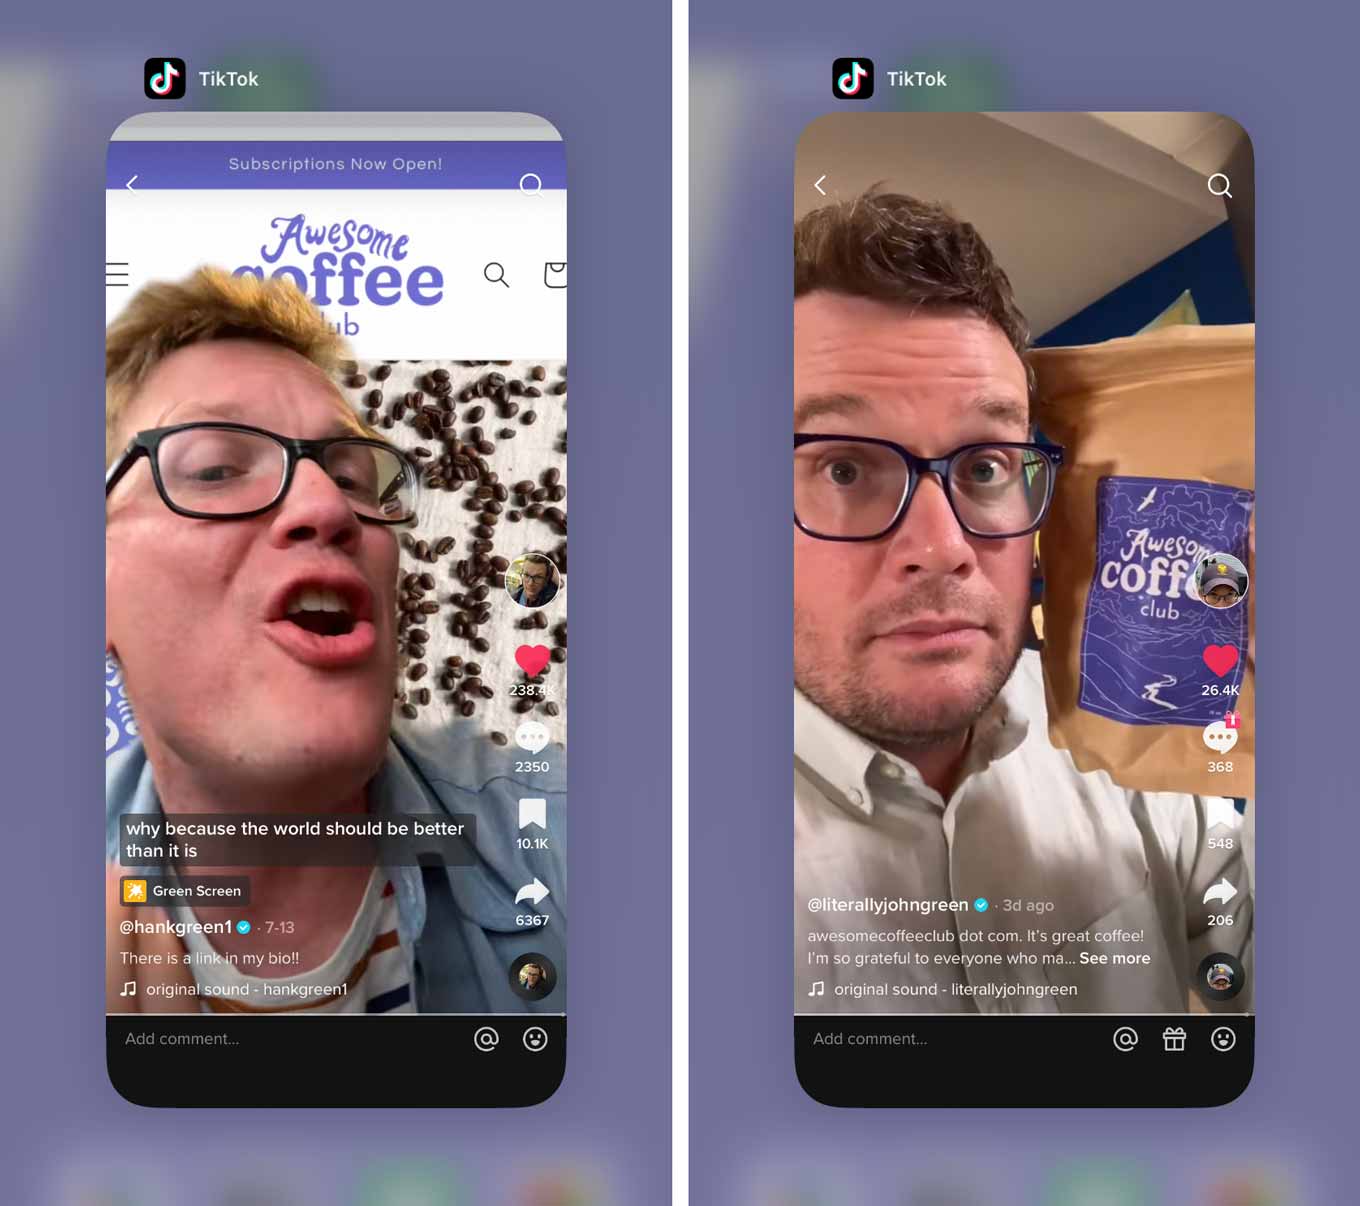 Two screenshots, of Hank Green and John Green, promoting the Awesome Coffee Club on TikTok